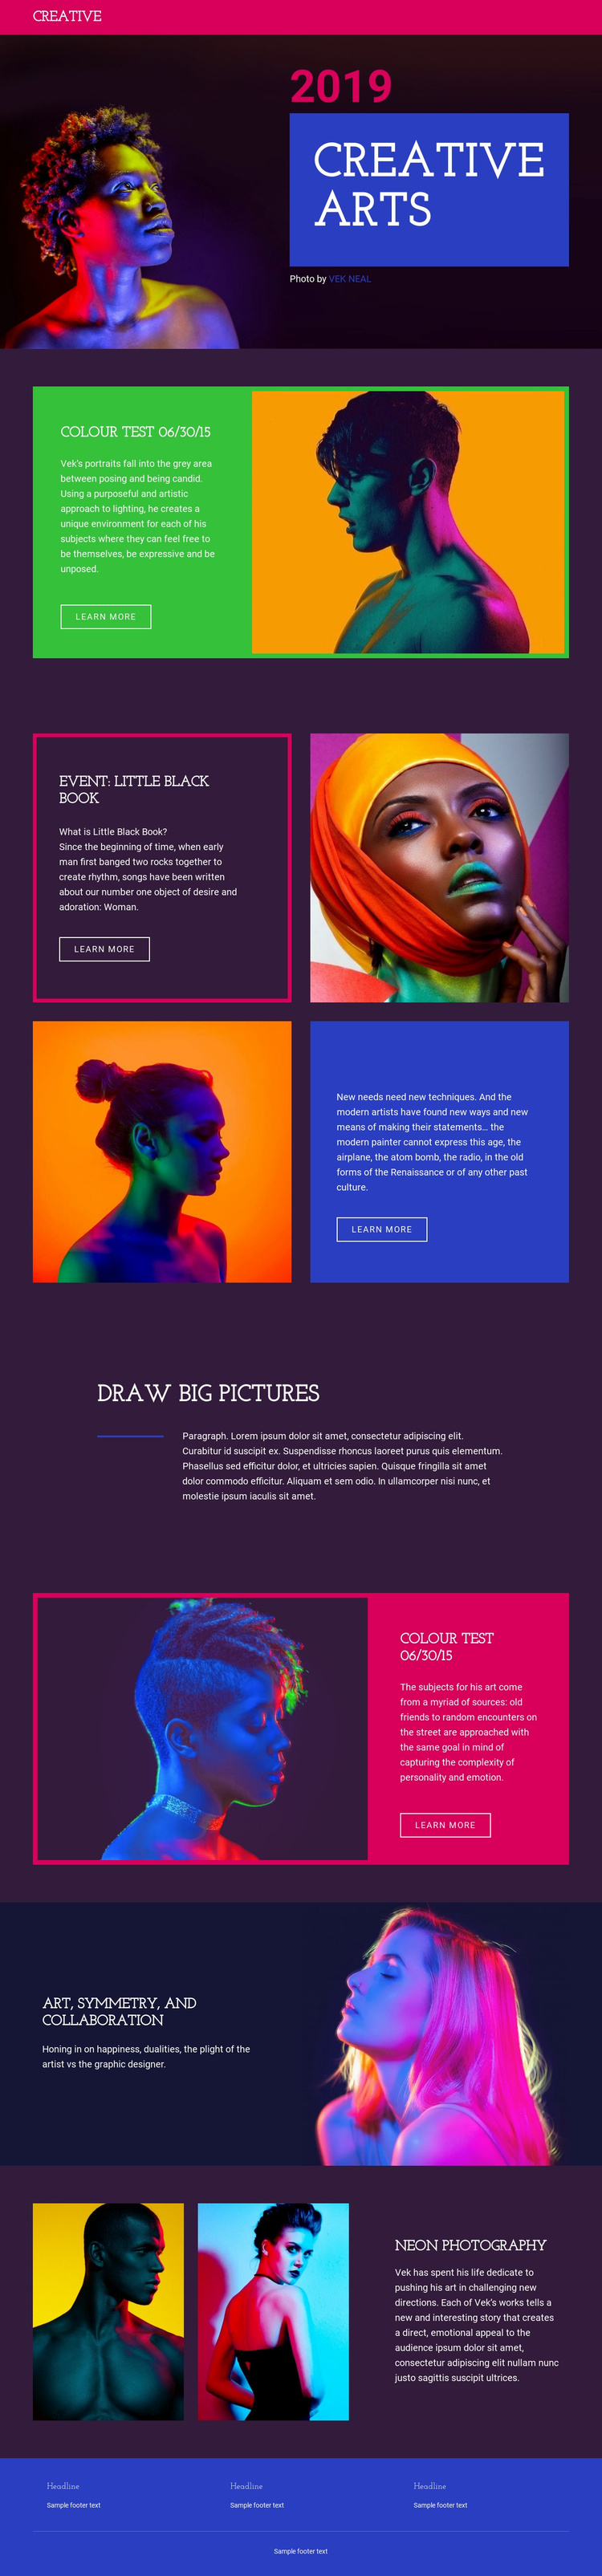 Limited-edition photography Website Template